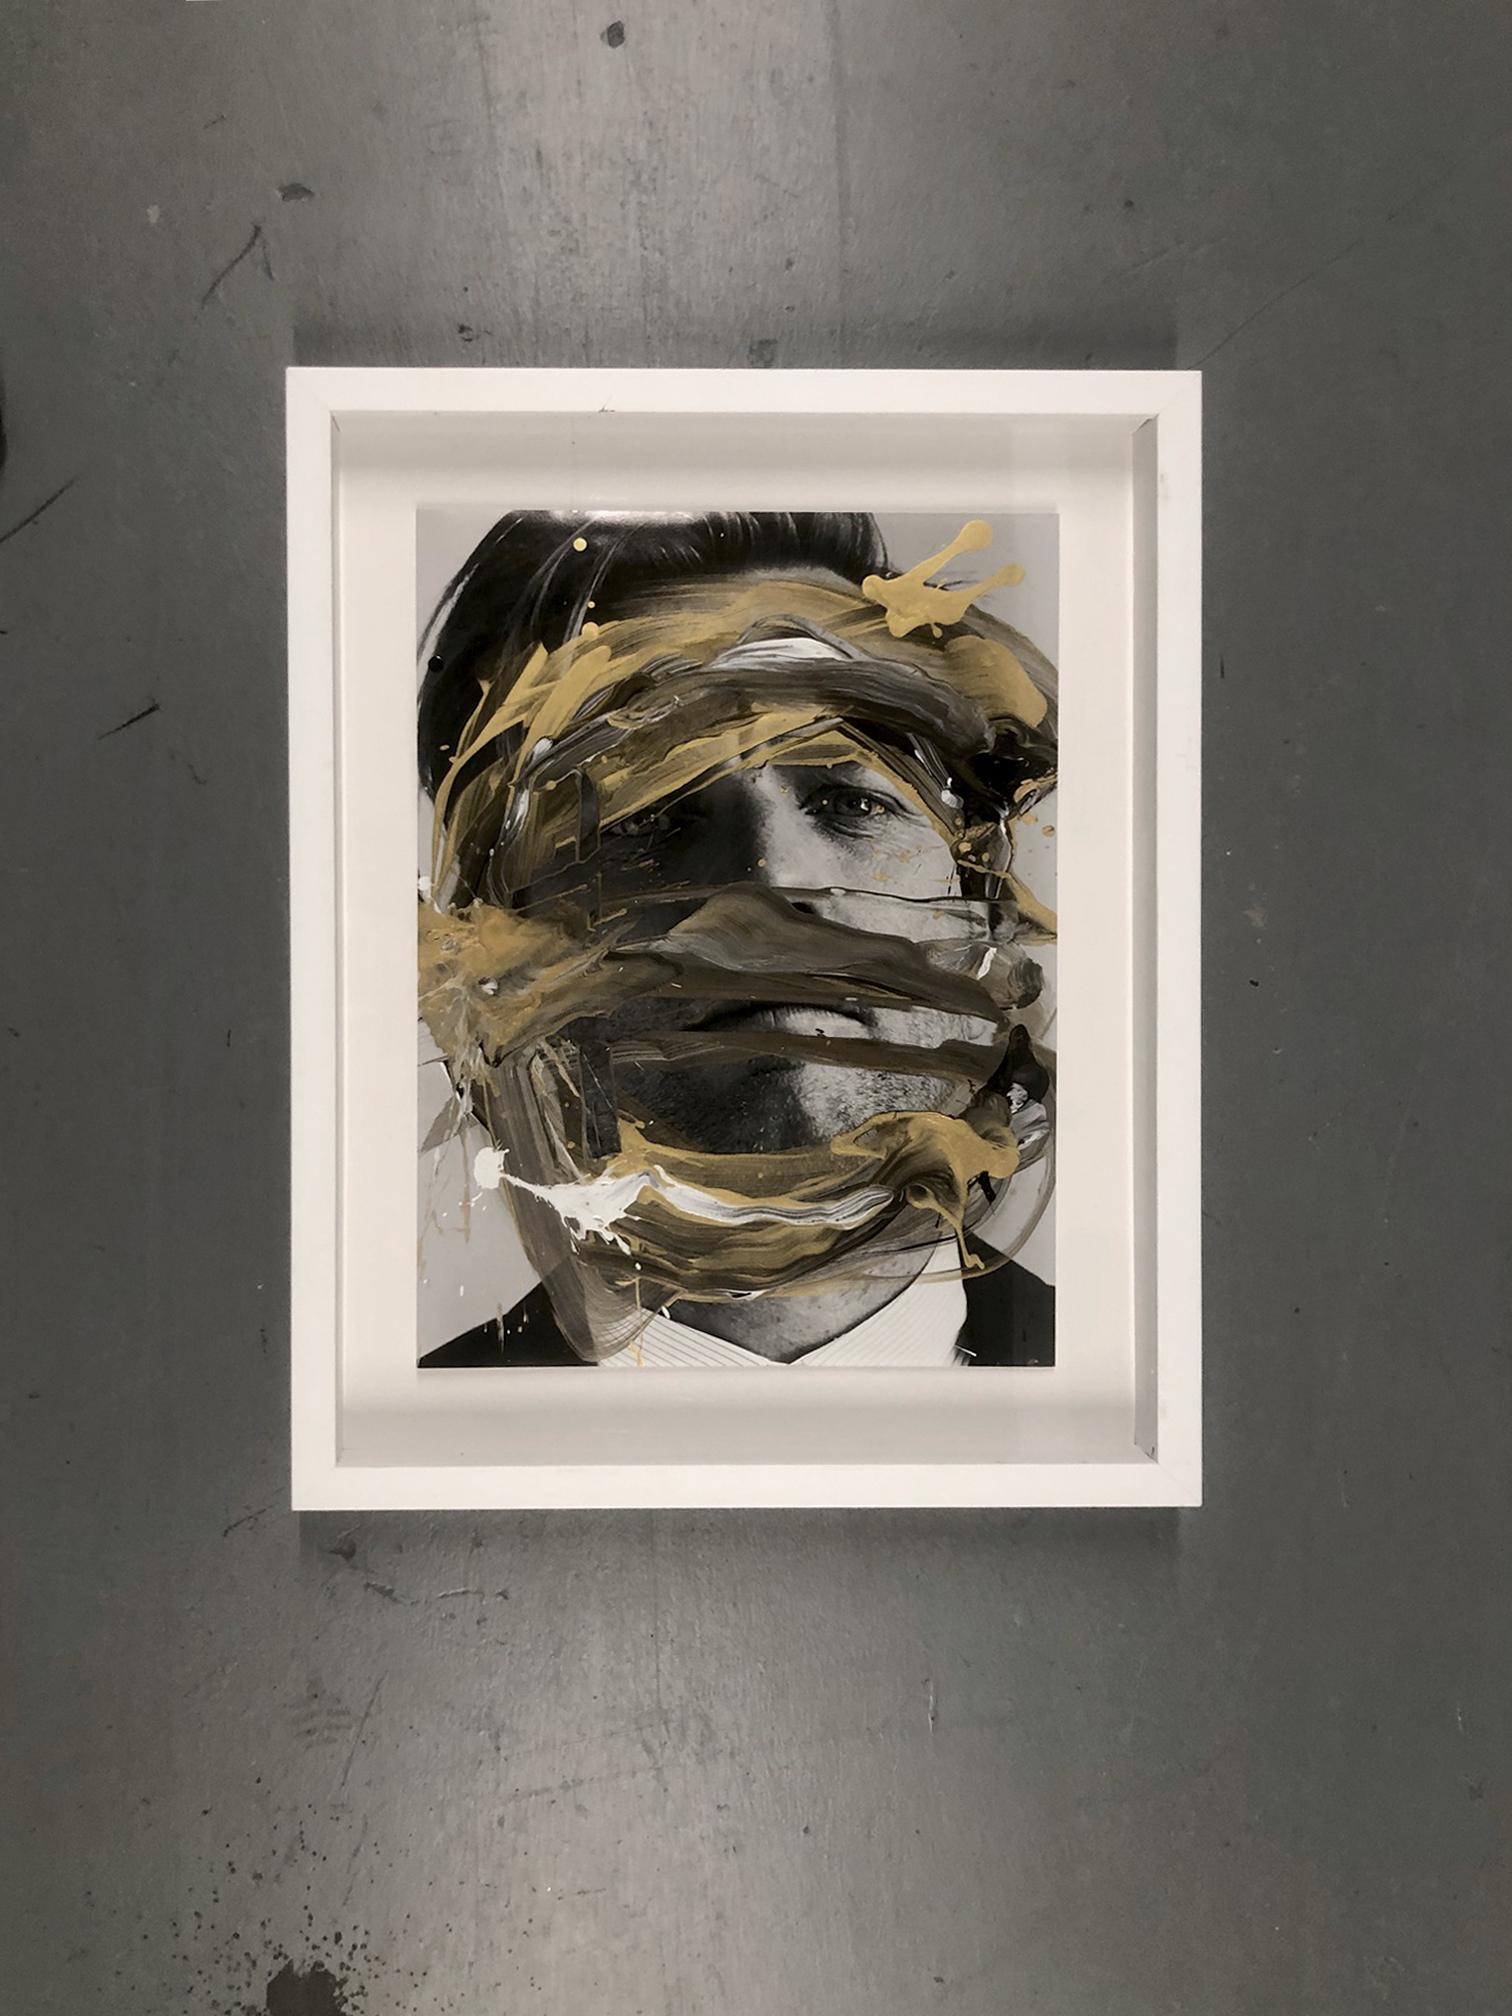 Ewan Mcgregor Portrait, 2015 by Hunter & Gatti
Acrylic & Oil on Pigment Print
Image size: 19.5 in H x 14.5 in W
Frame size: 29 in H x 25 in W x 2 in D
Signed back with the date.
White wood Frame

Black and white Photography 
Intervened by the